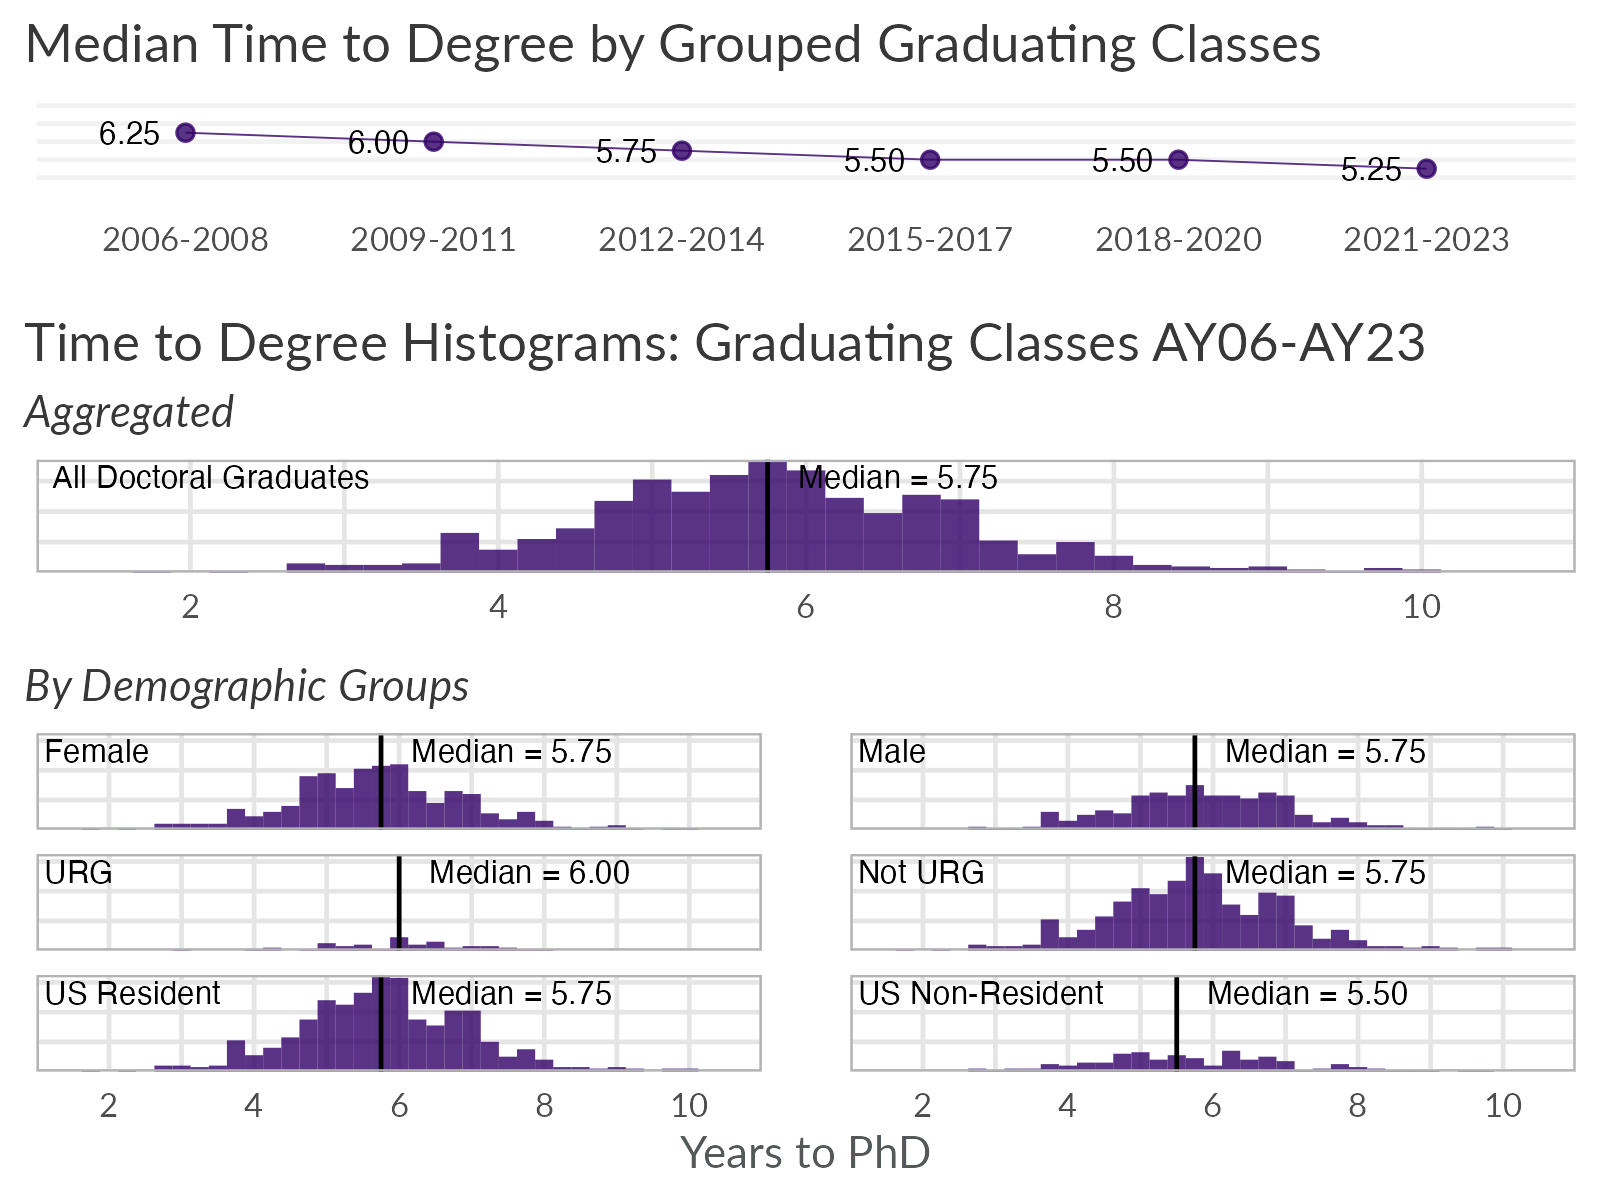 School of Medicine time to degree summary for doctoral program graduates,  graduating classes 2006 through 2023; includes median time to degree by grouped graduating classes, histograms of time to degree for all graduates, and histograms by demographic groups, with median time to degree for each histogram